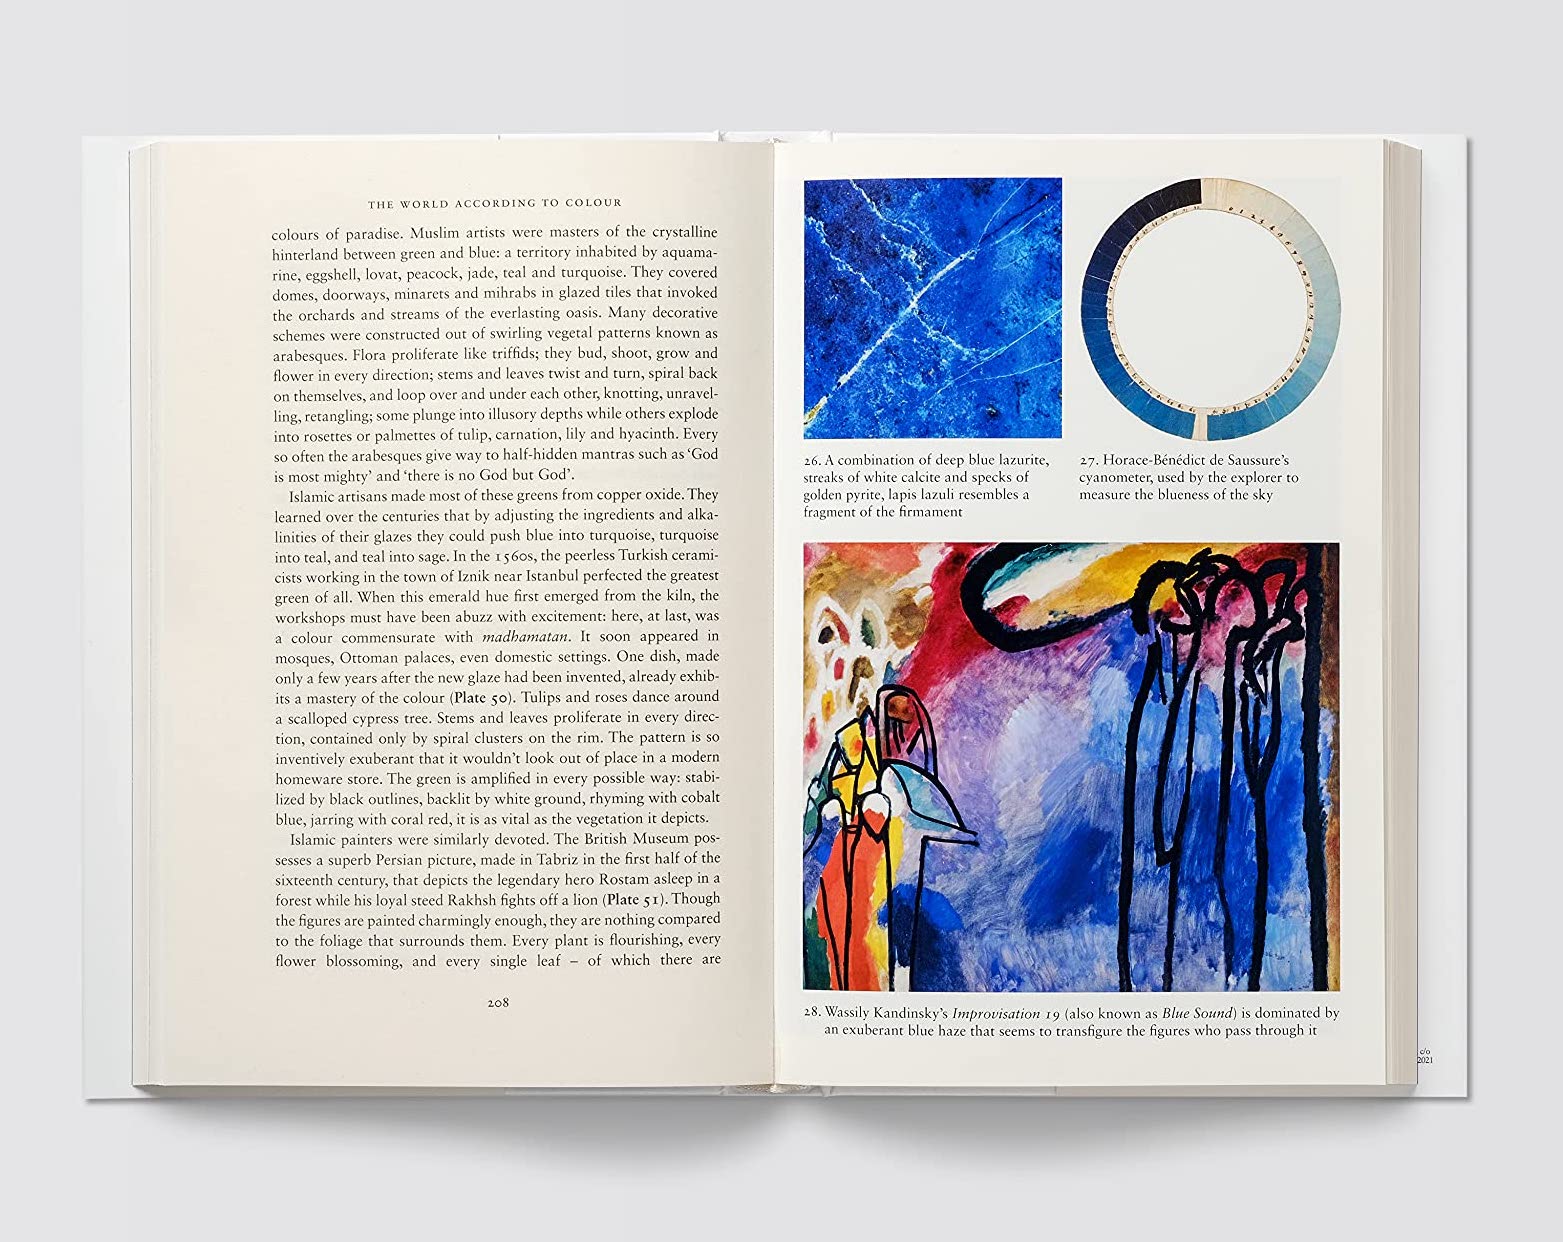 The Wick - The World According to Colour: A Cultural History by James Fox 